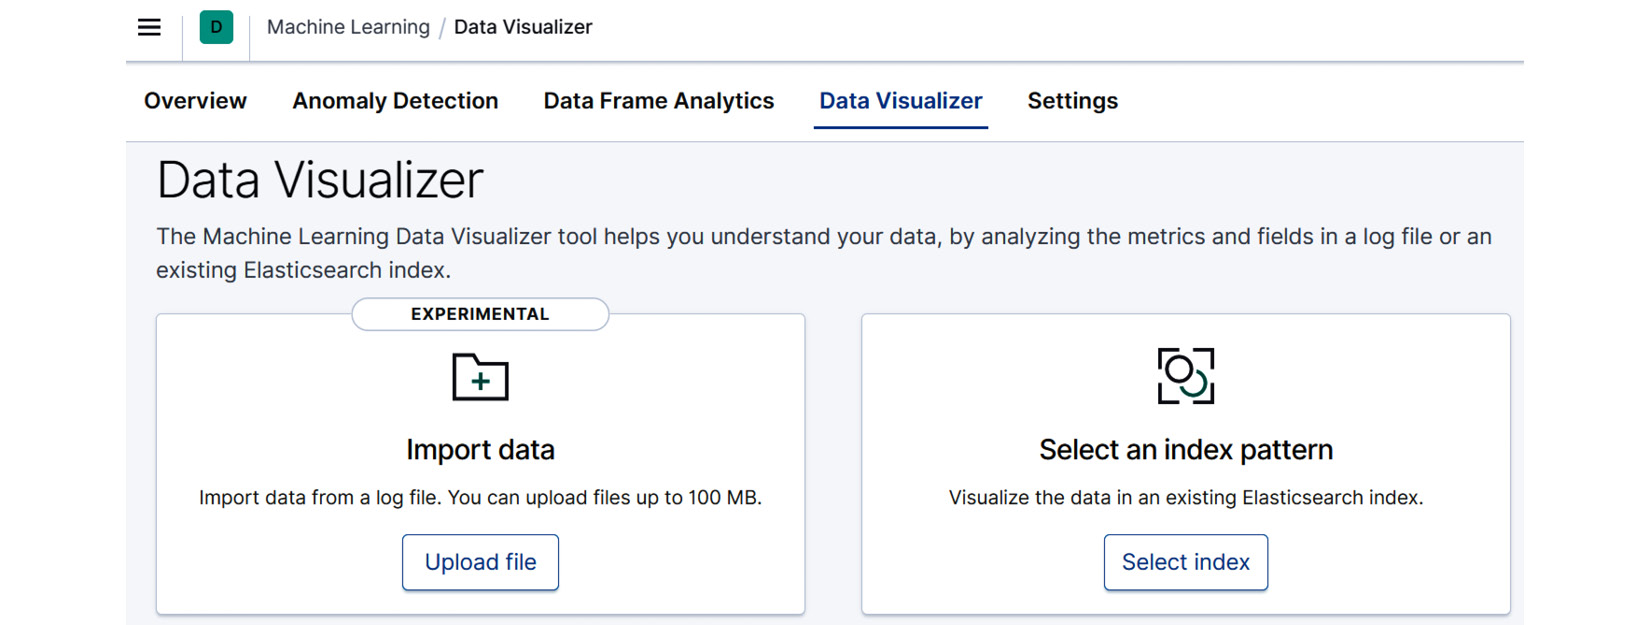 Figure 12.1 – The Upload file functionality in the Machine Learning app's Data Visualizer 
